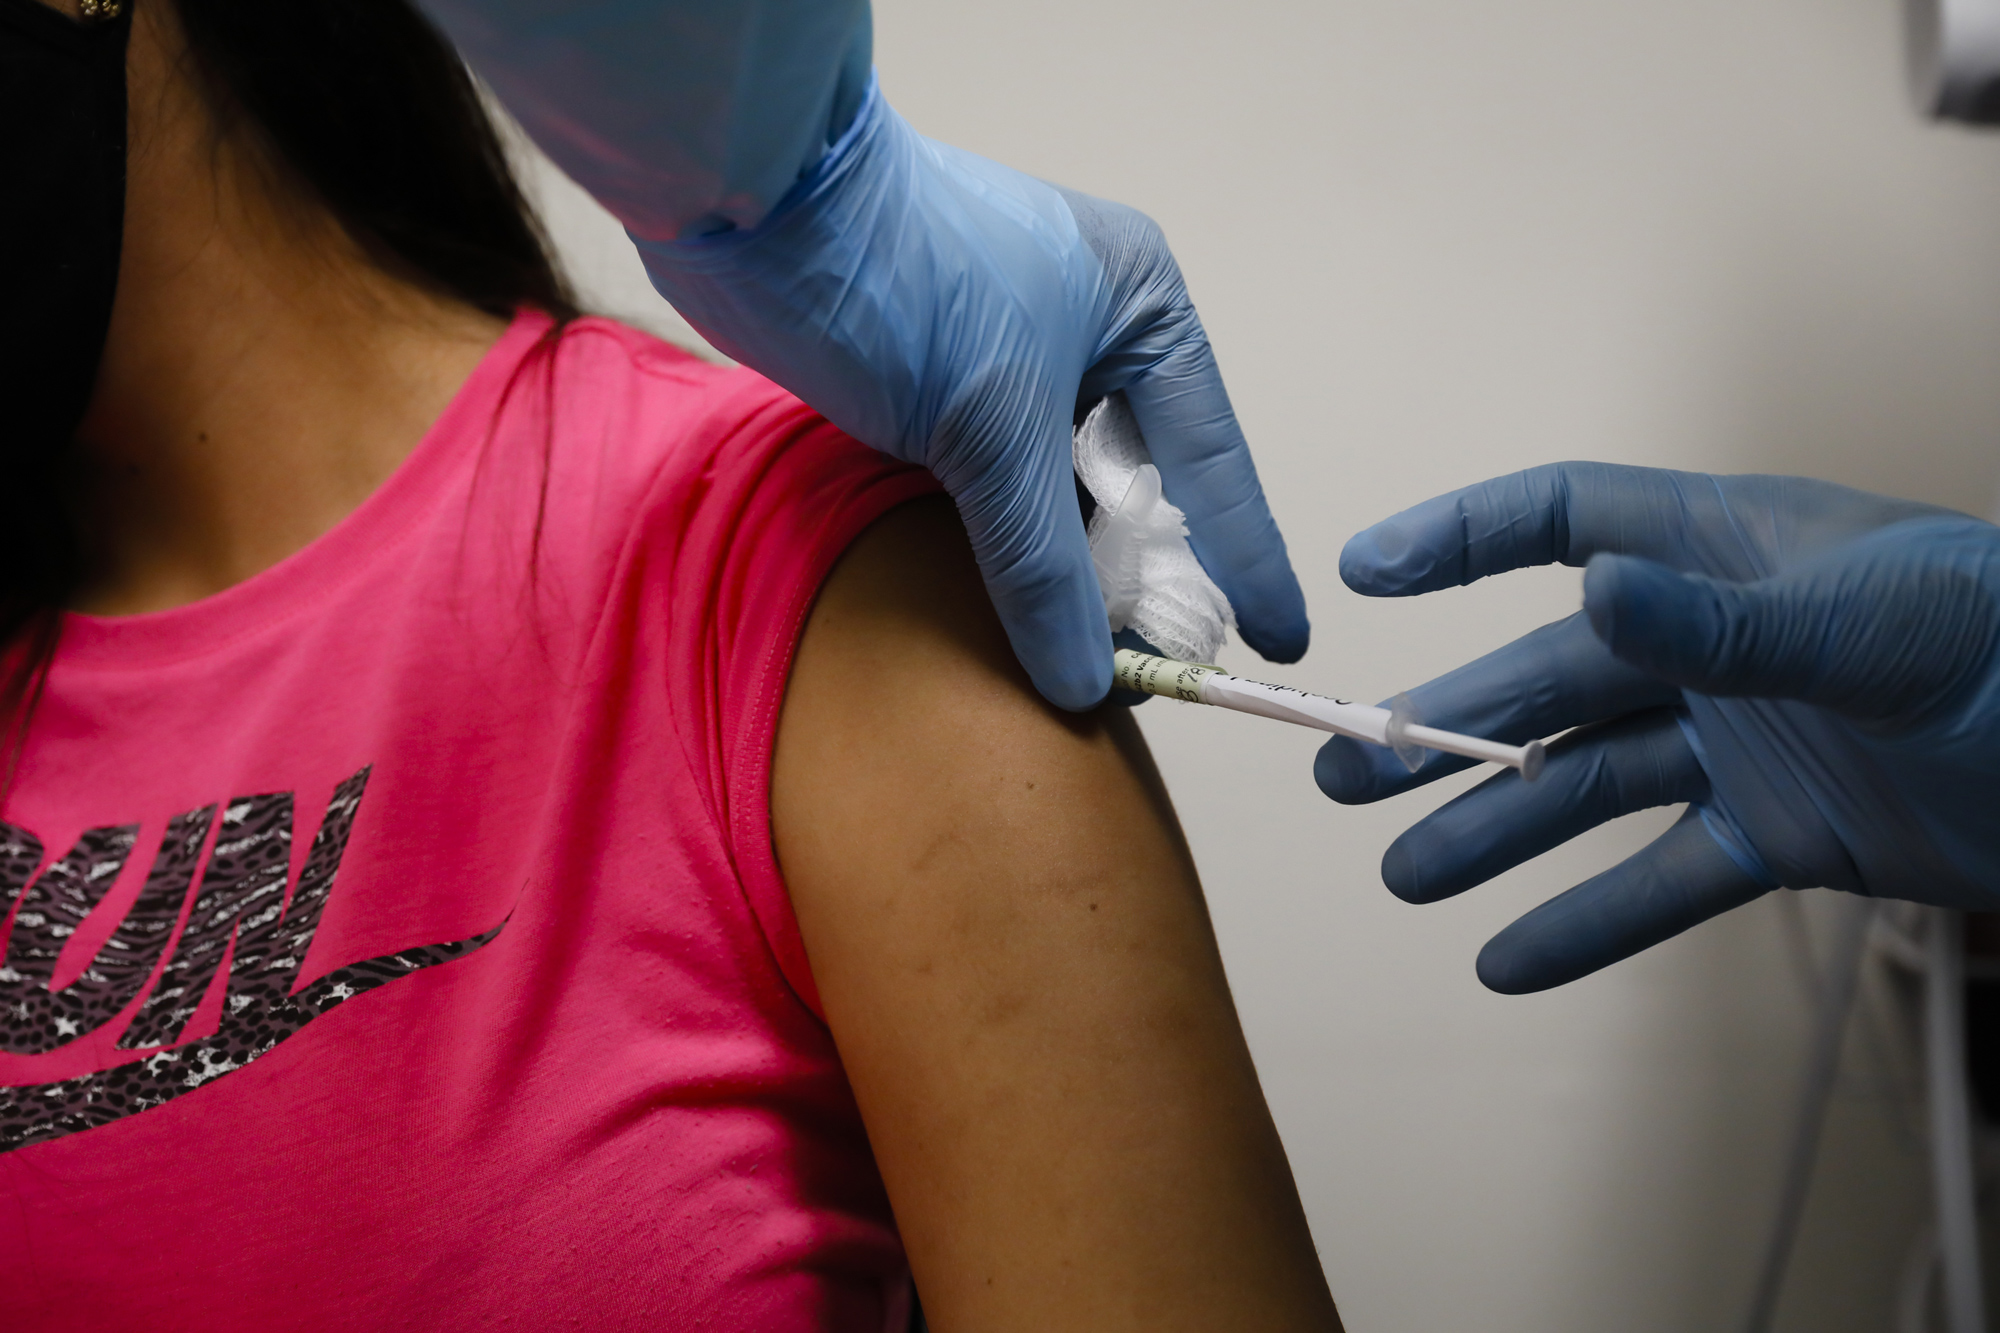 A health worker injects a person during clinical trials for a Covid-19 vaccine at Research Centers of America in Hollywood, Florida, on September 9.